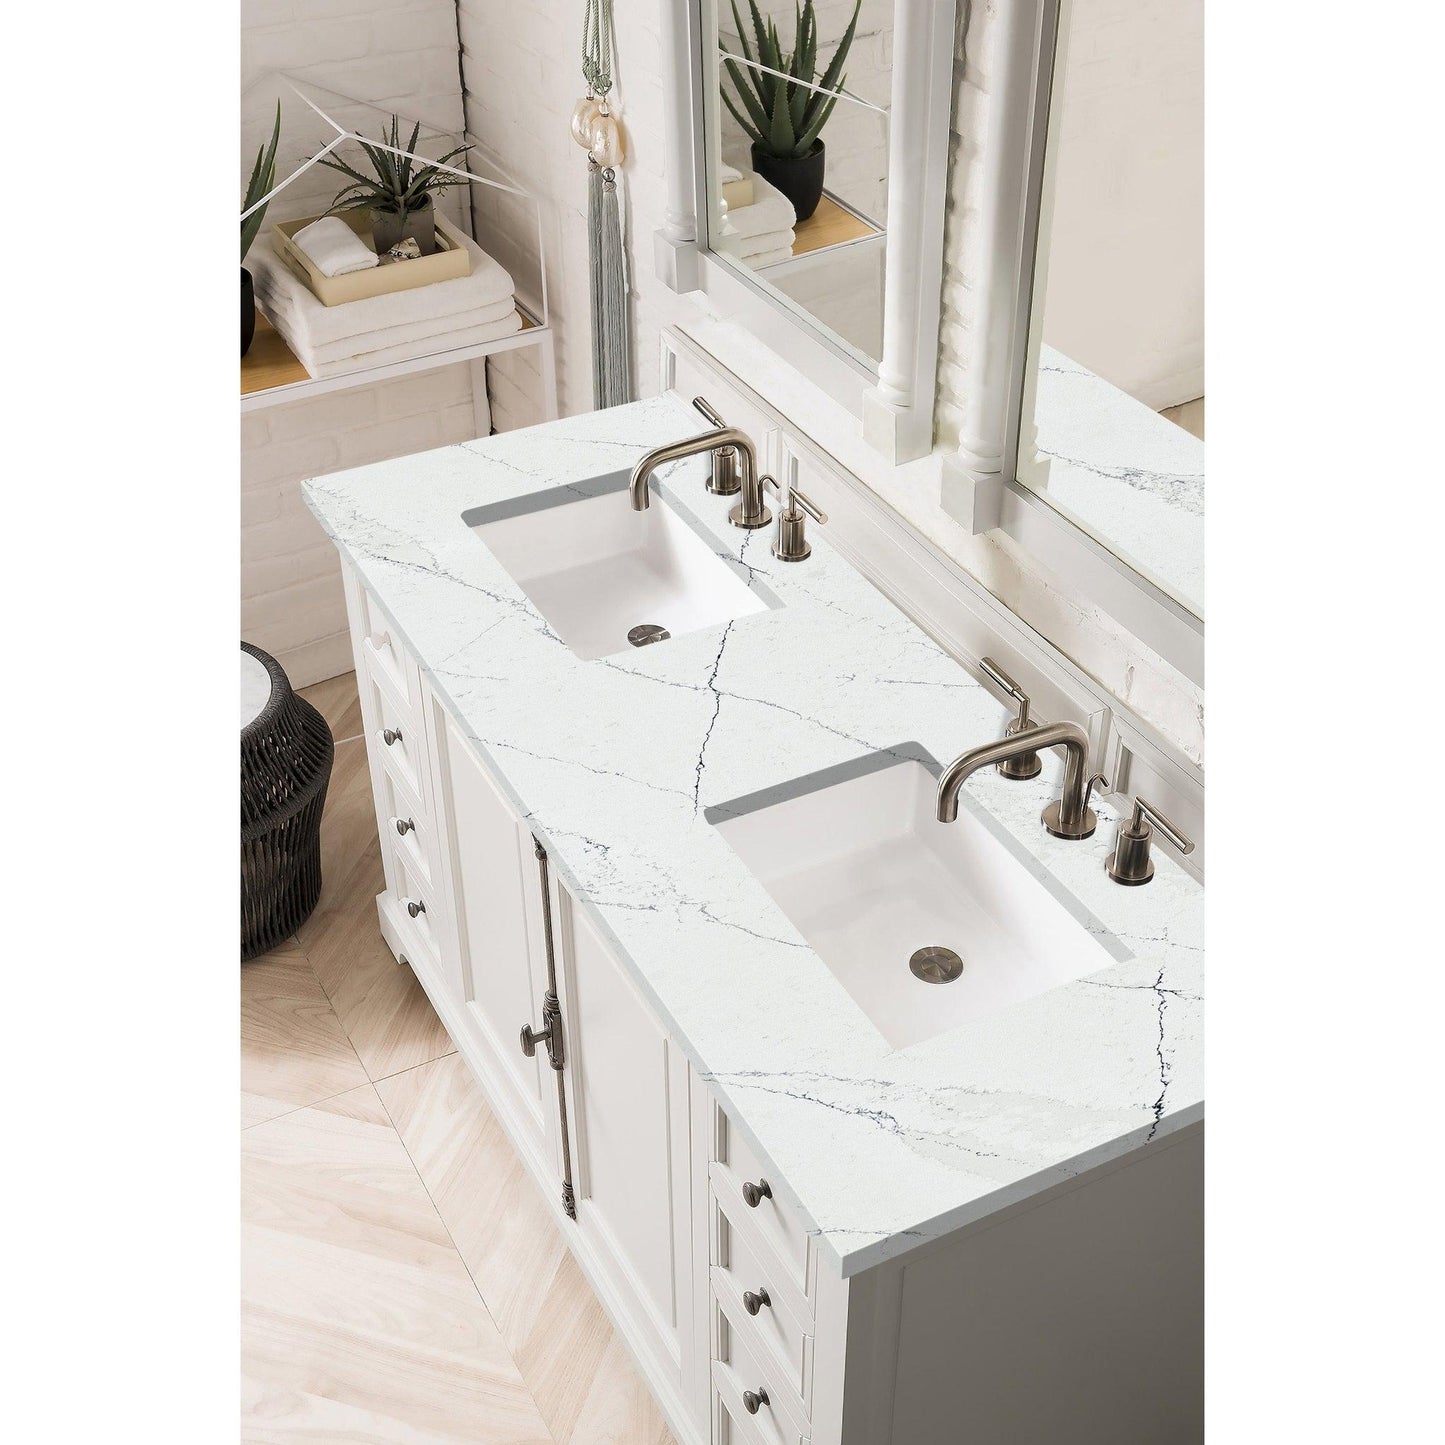 James Martin Vanities Providence 60" Bright White Double Vanity Cabinet With 3cm Ethereal Noctis Quartz Top